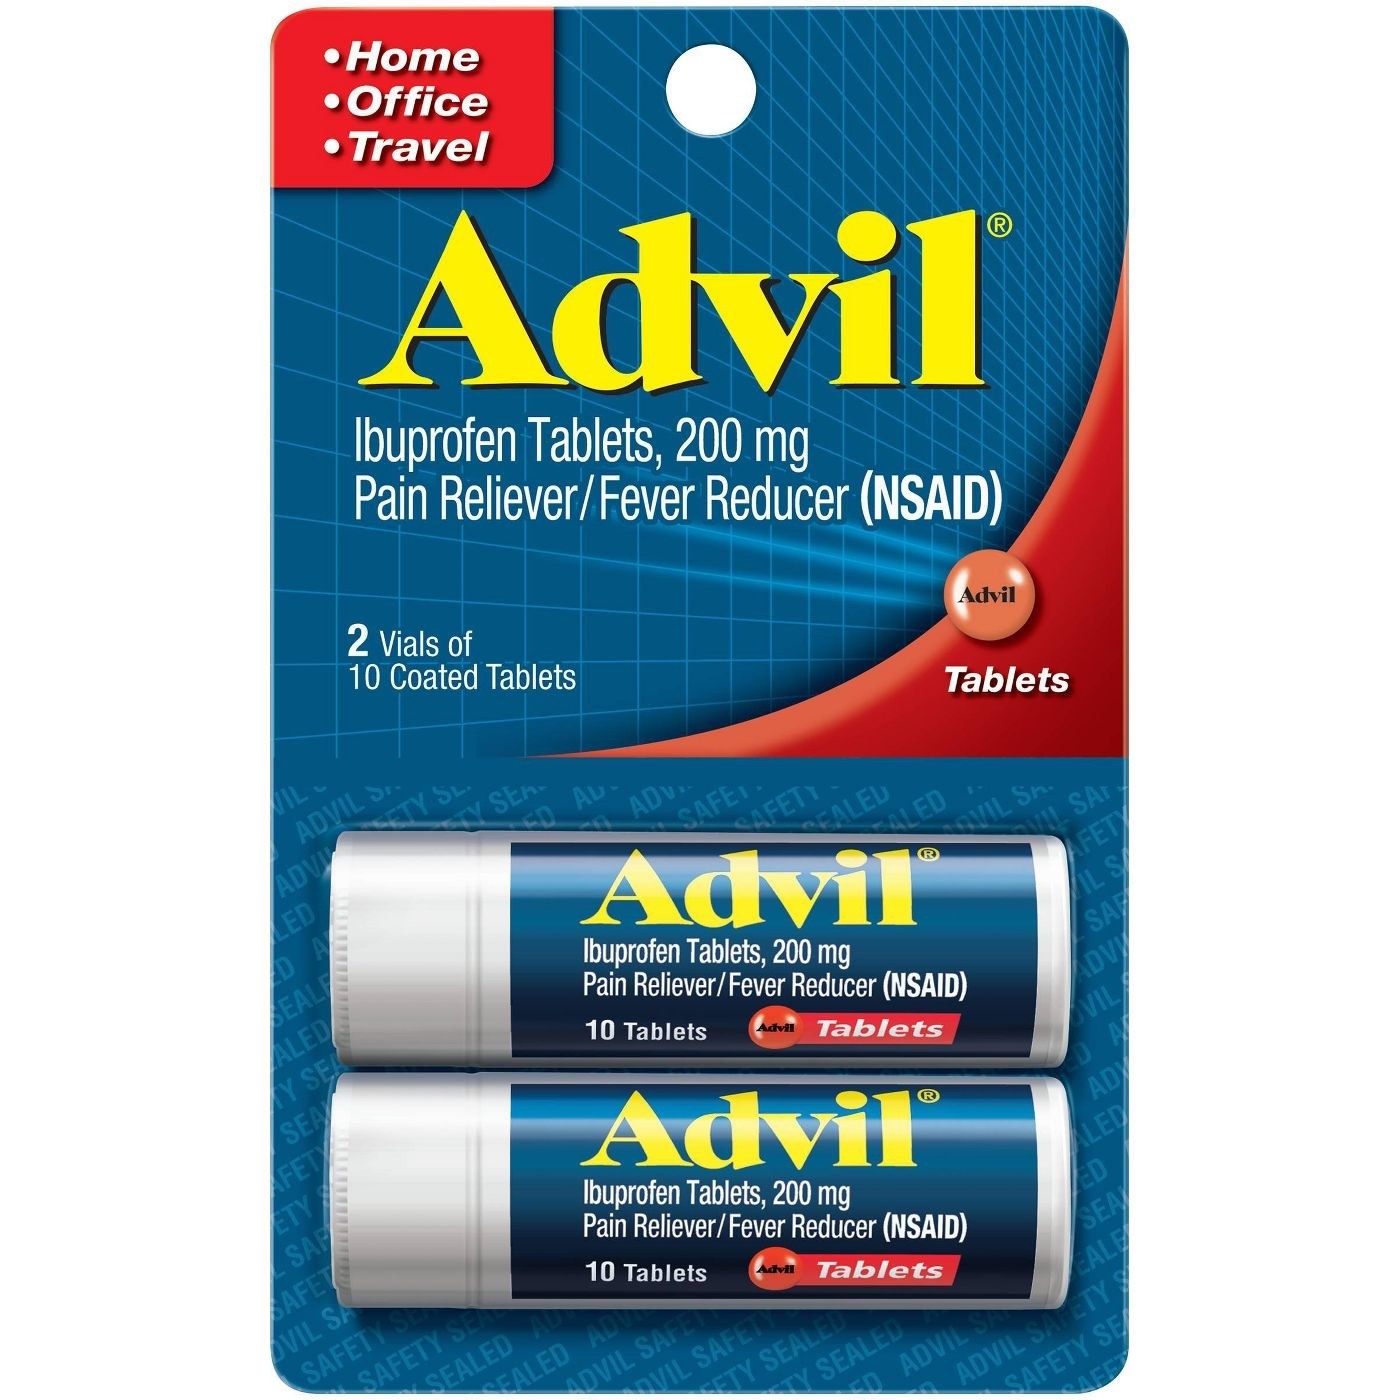 Advil Pain Reliever/Fever Reducer Tablets - Ibuprofen (NSAID)